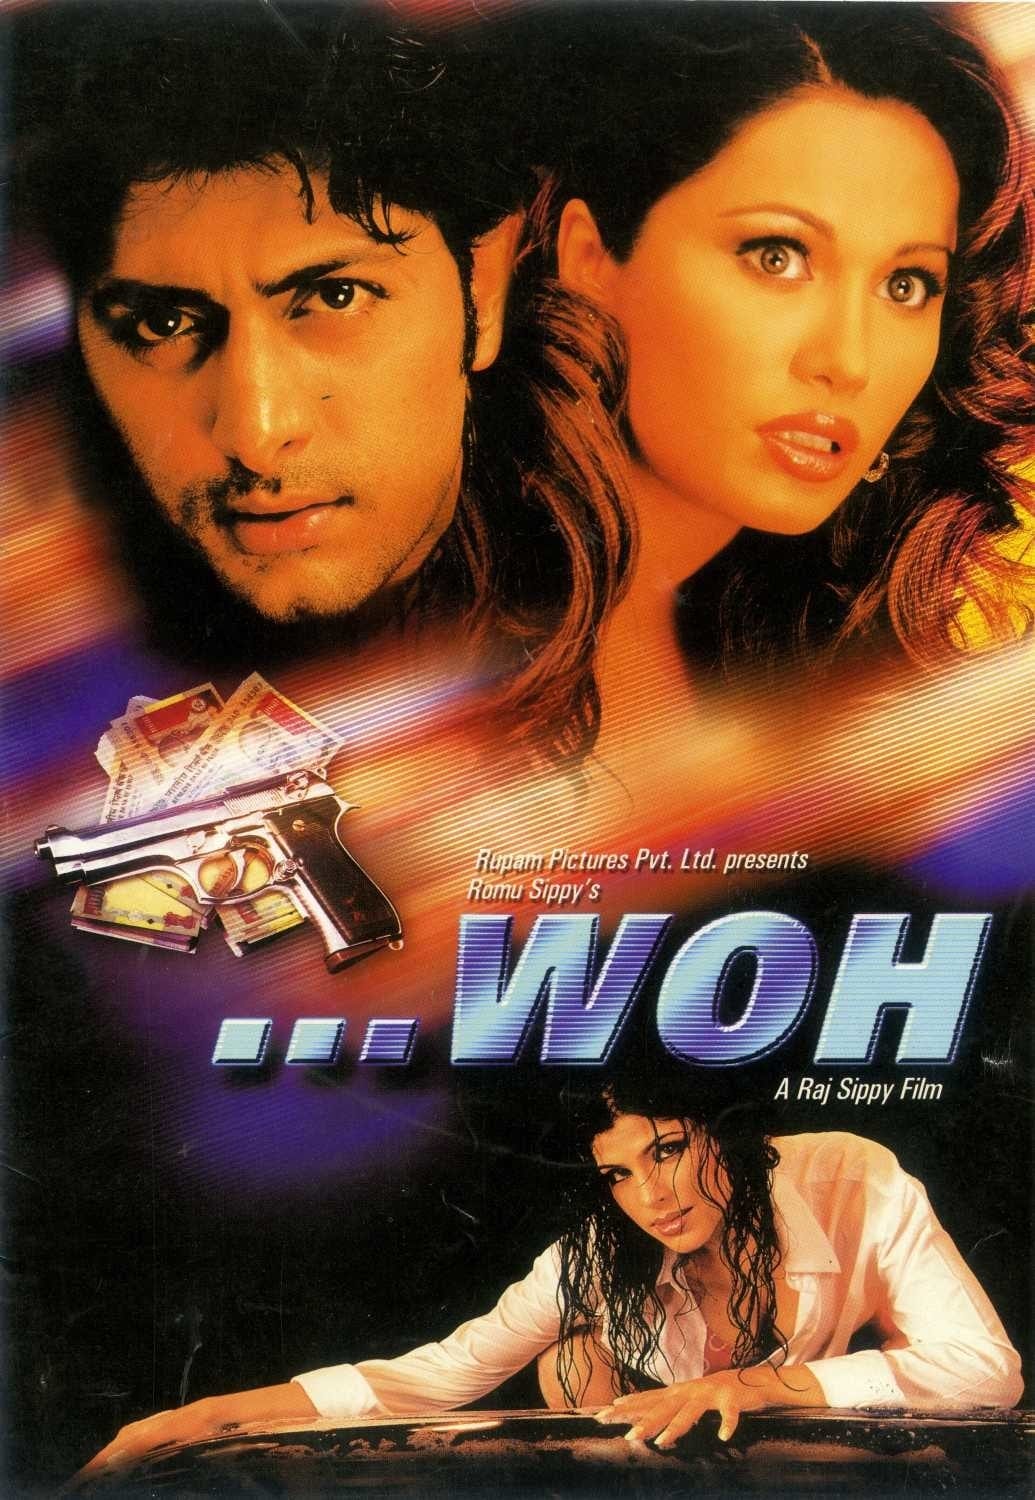 Poster for the movie "Woh"